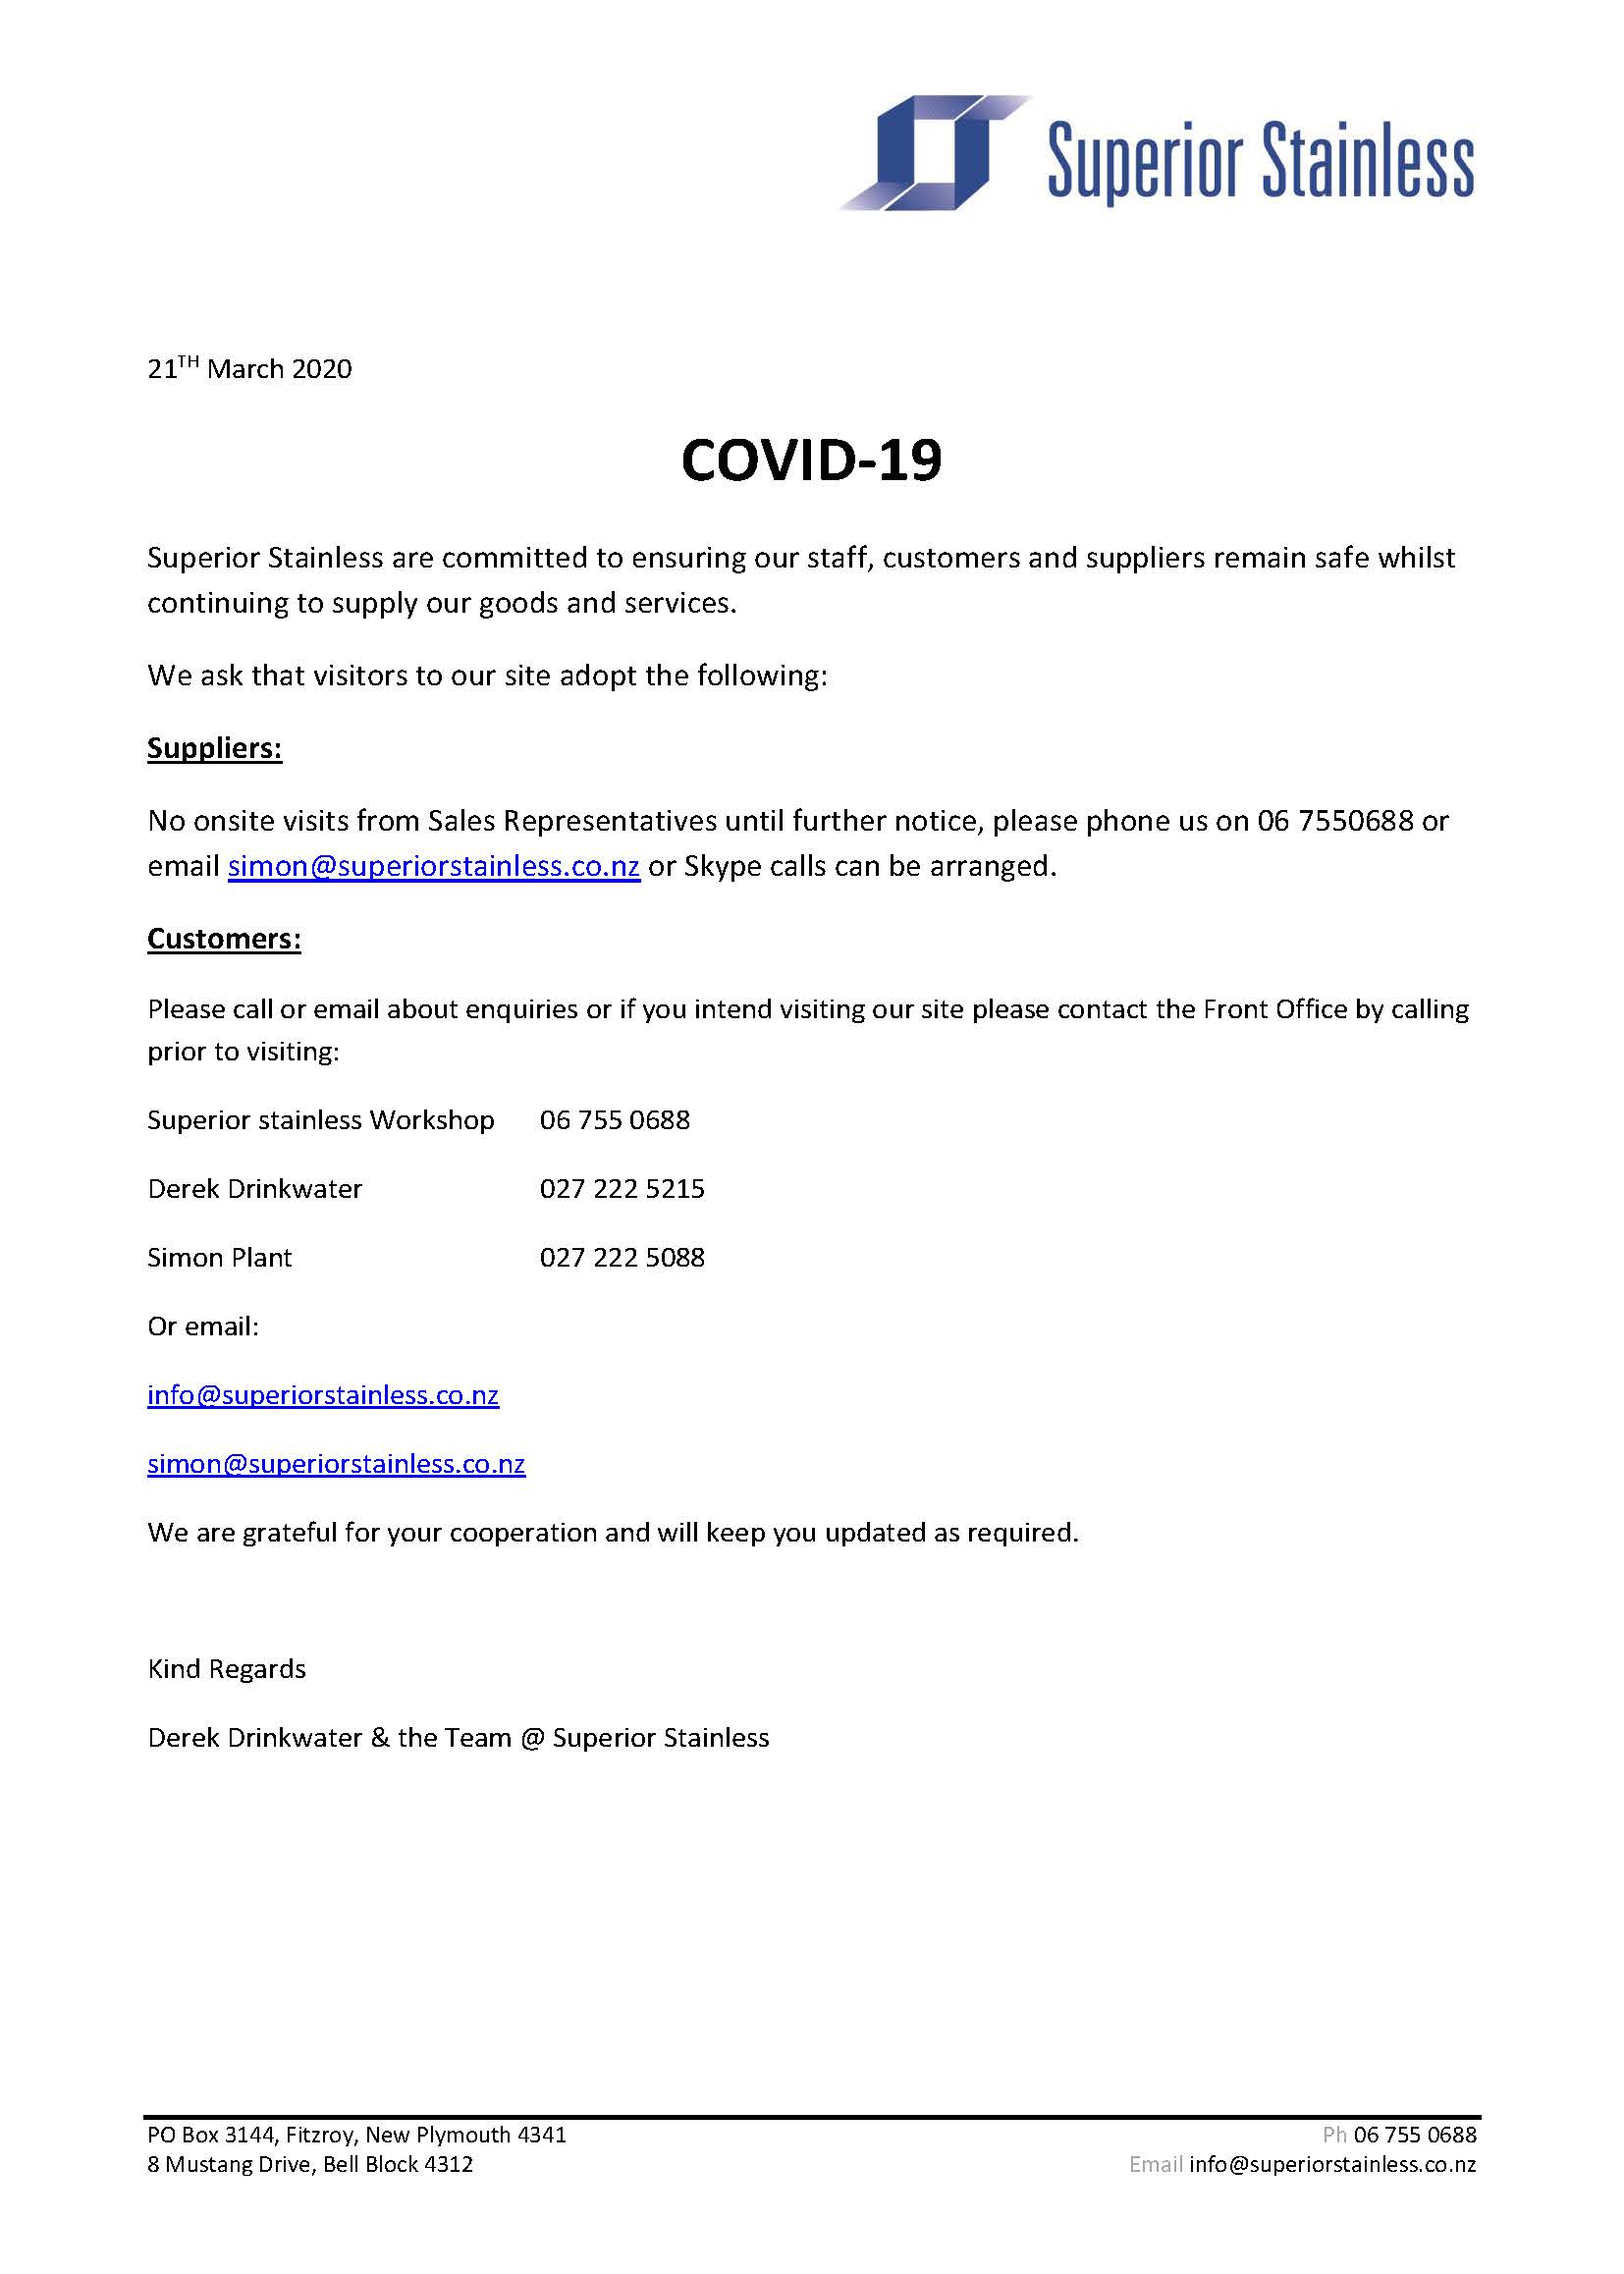 phd extension letter due to covid 19